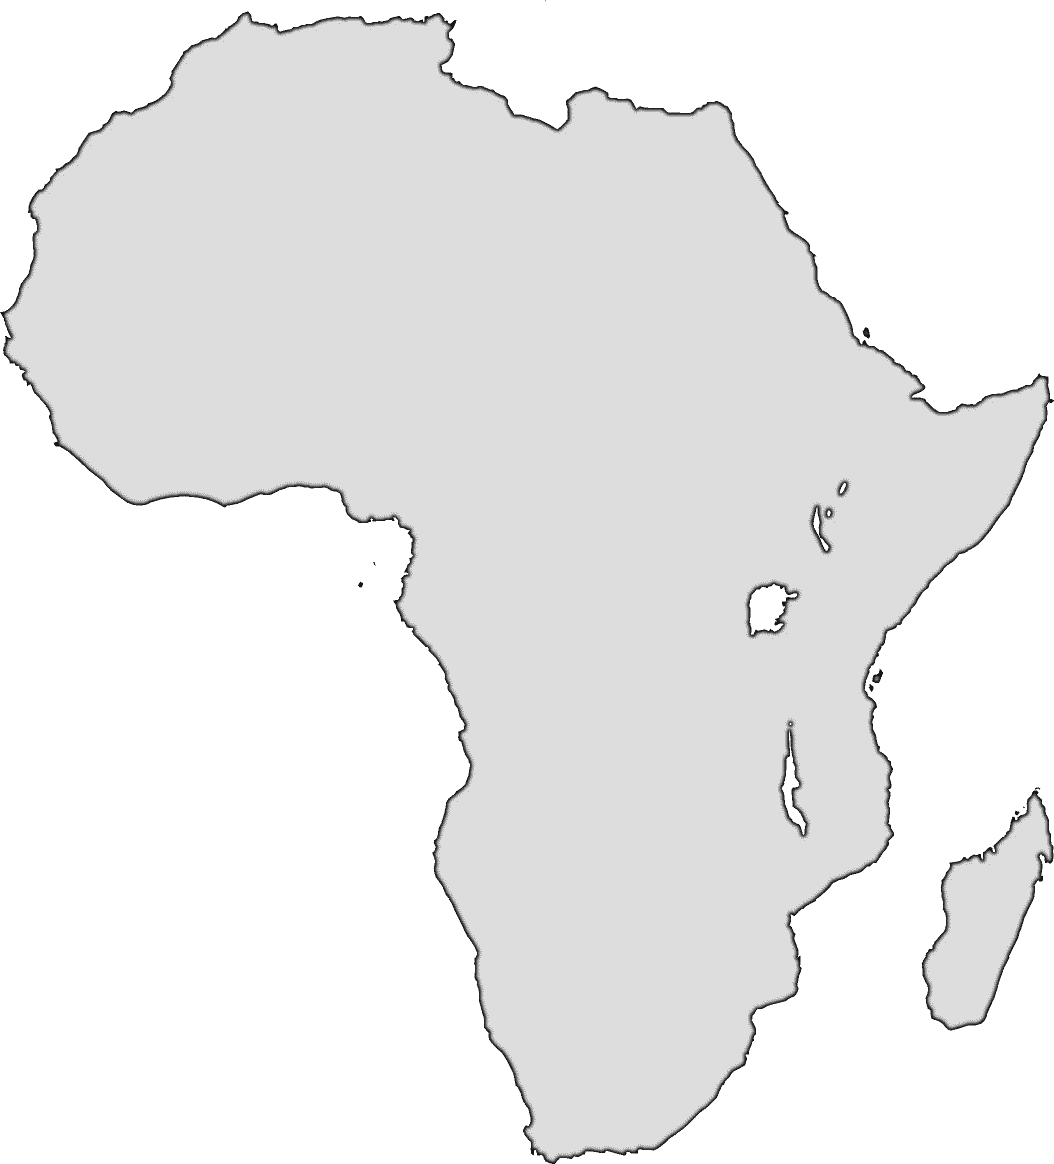 african continent clipart - photo #29